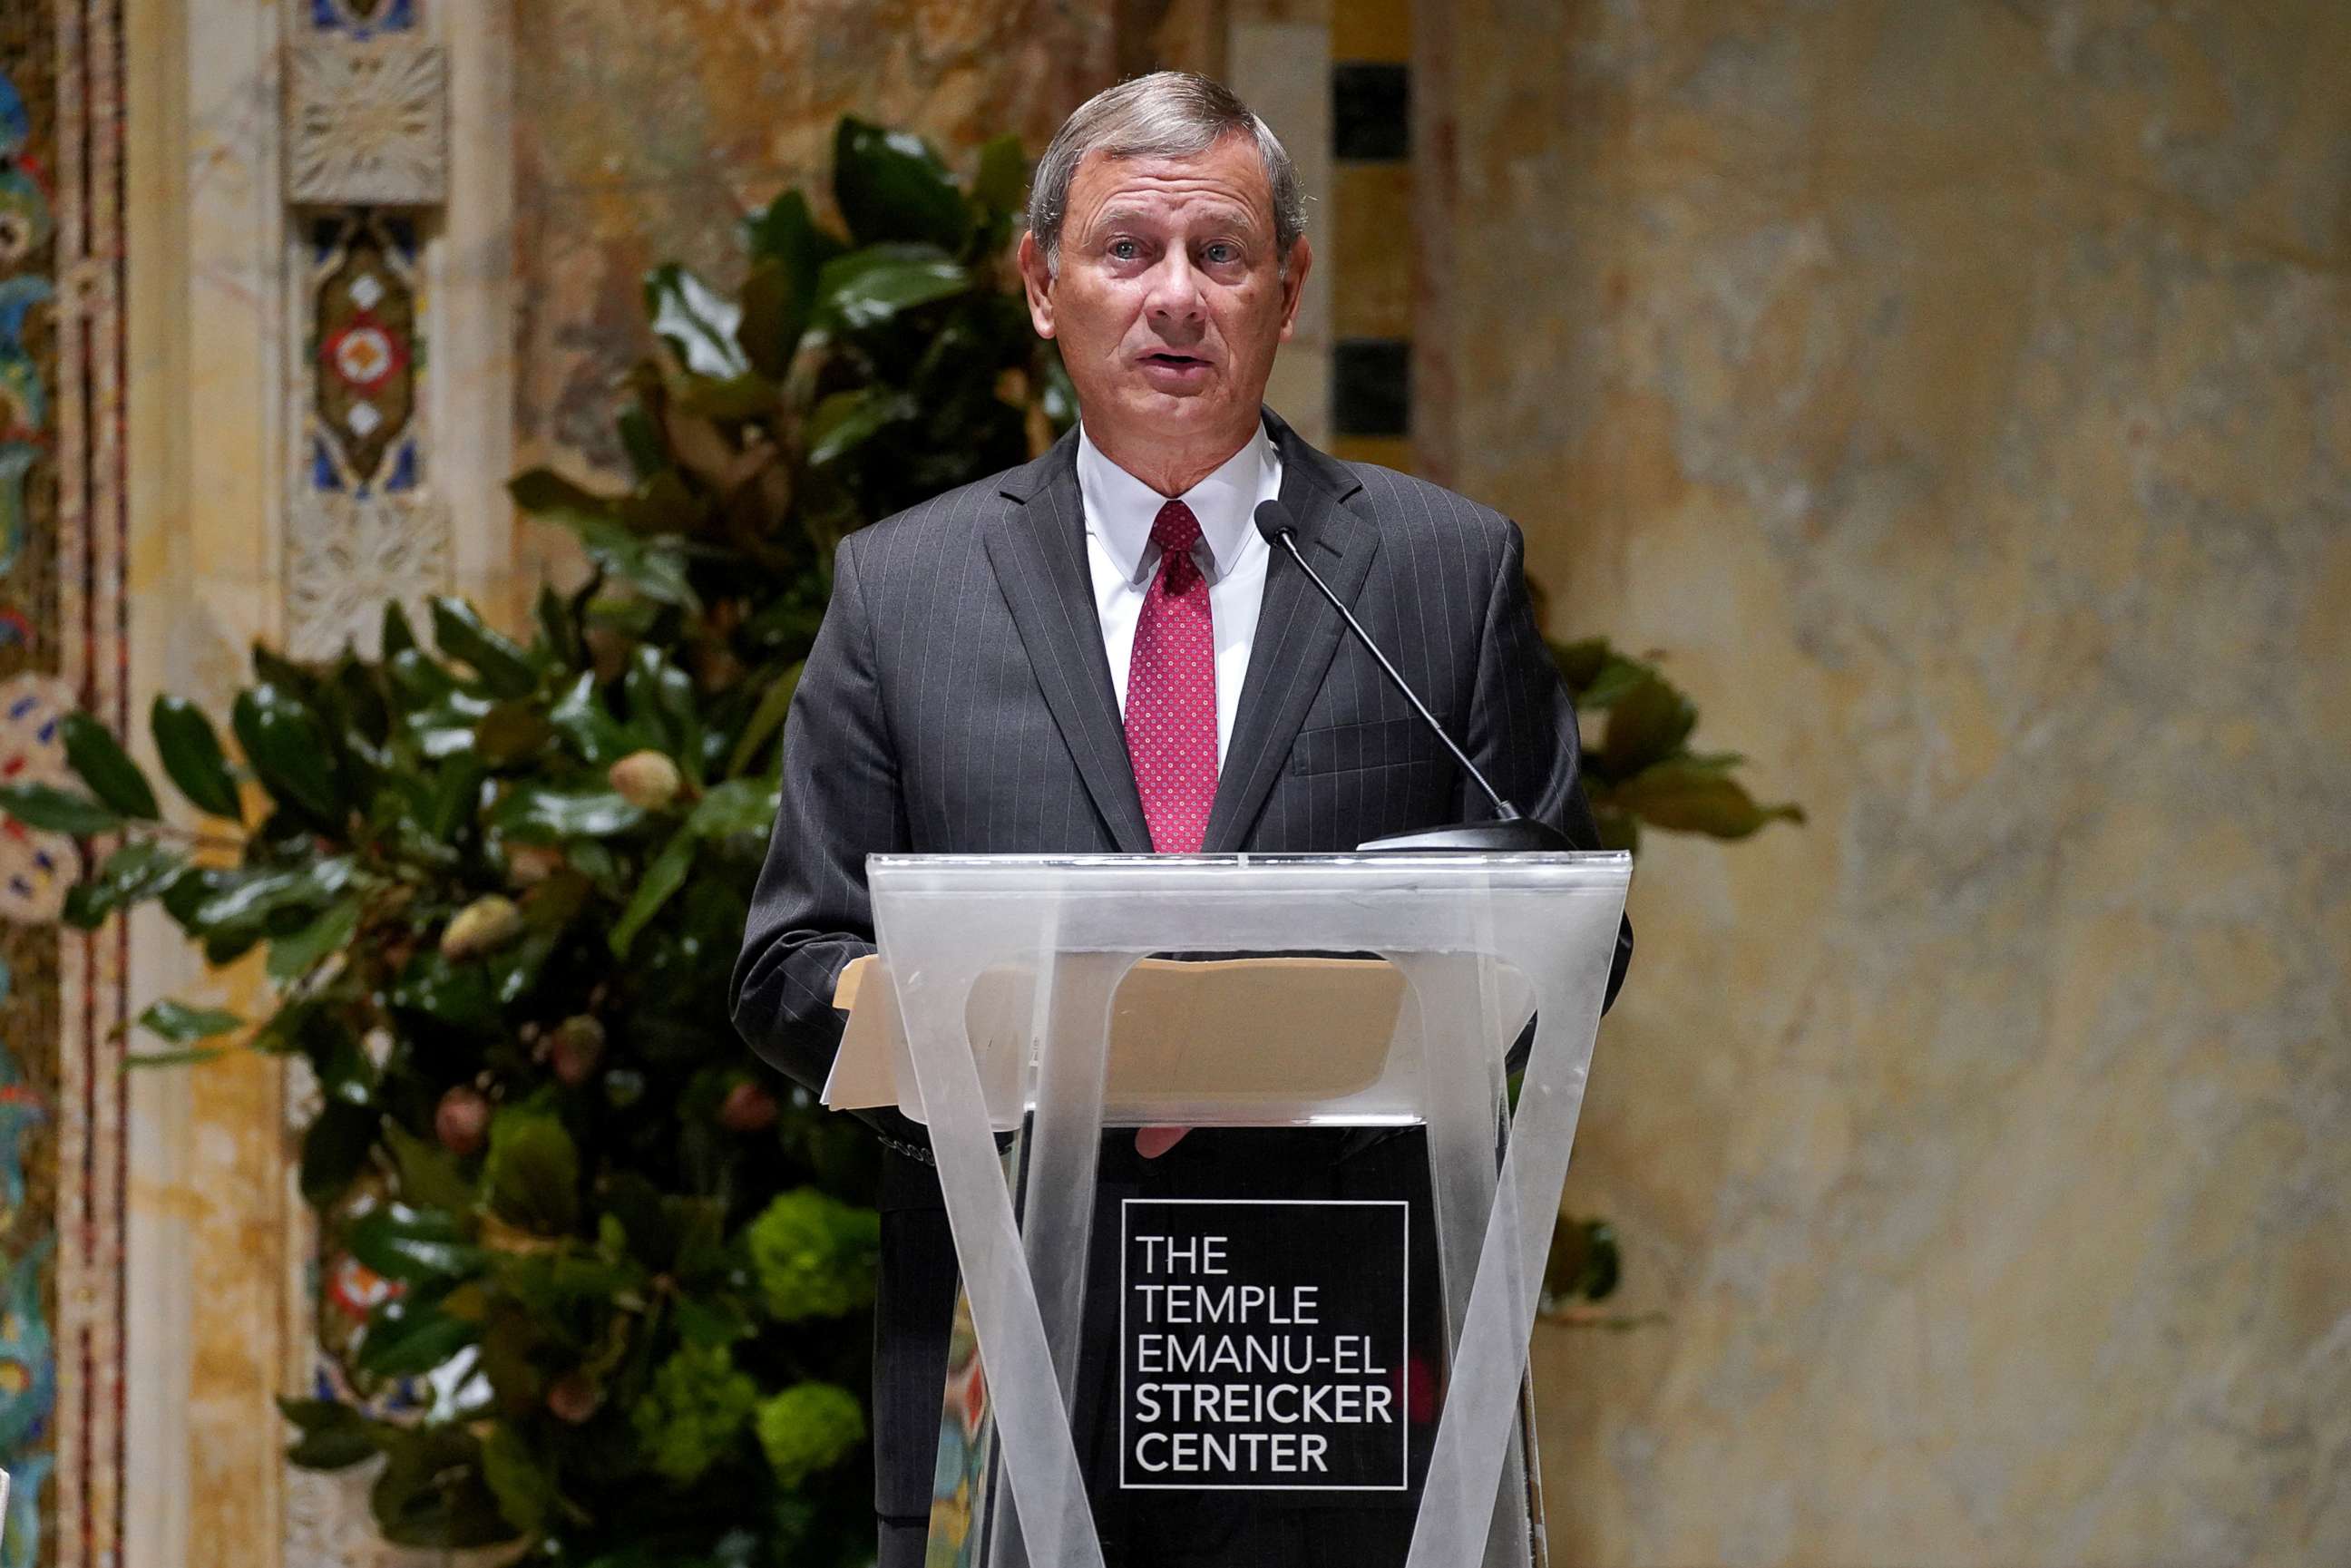 PHOTO: Chief Justice of the United States John G. Roberts Jr. speaks onstage during "A Conversation With Chief Justice Of The United States" at Temple Emanu-El on Sept. 24, 2019, in New York City.